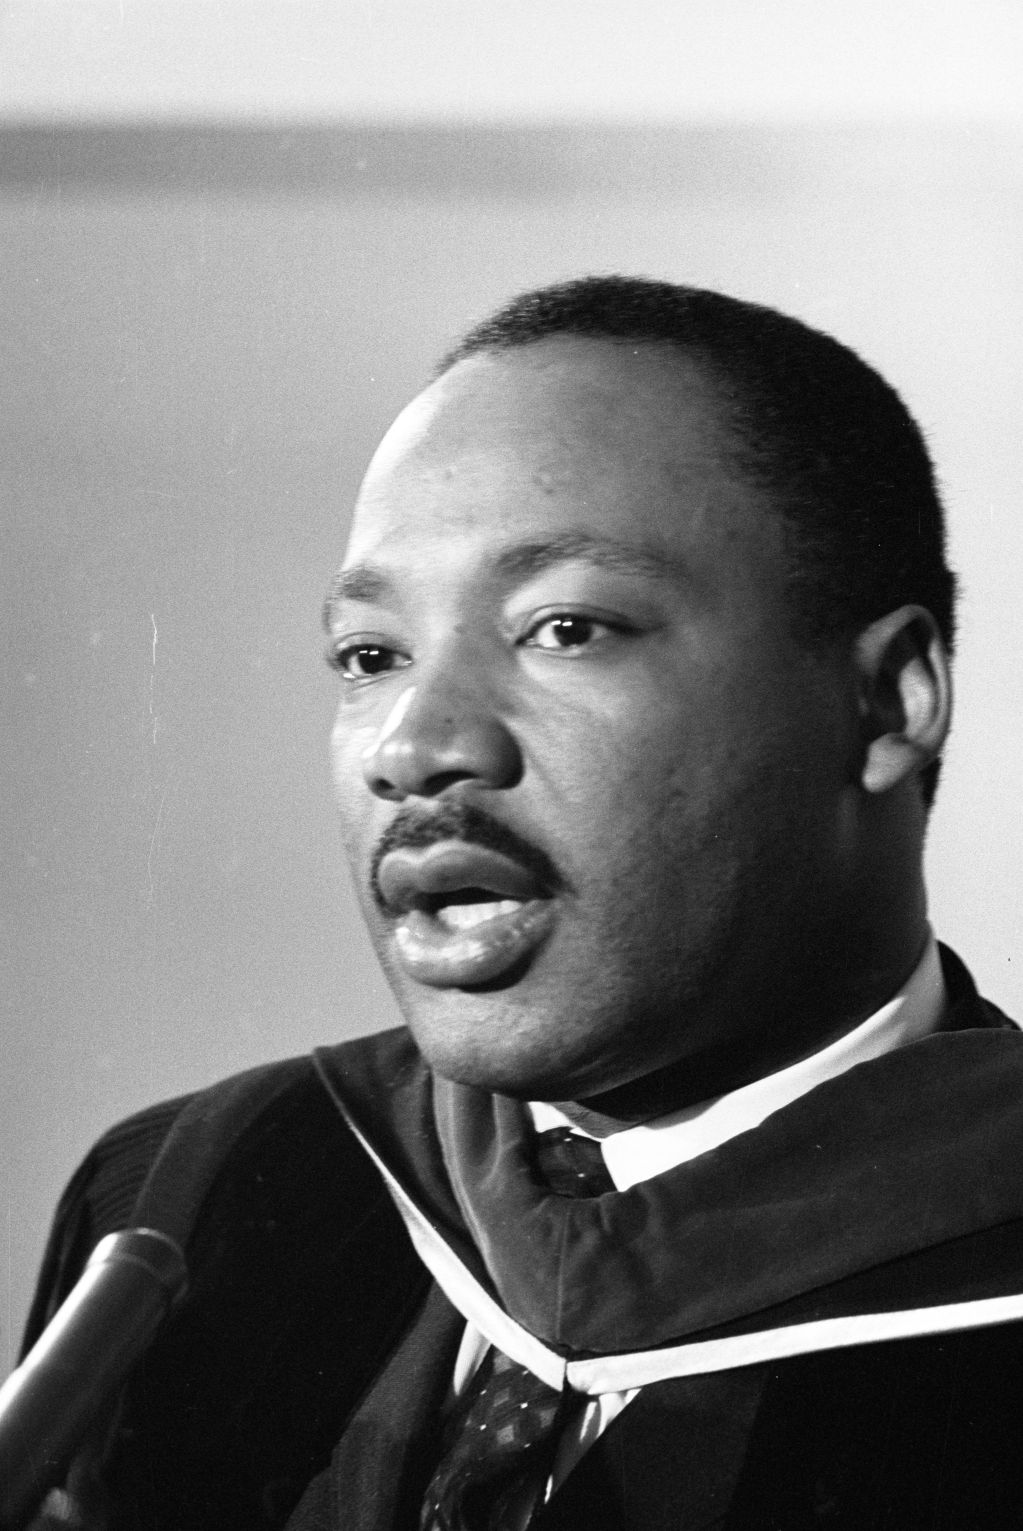 Let Freedom Ring 12 Rare Photos Of Dr. Martin Luther King Jr.